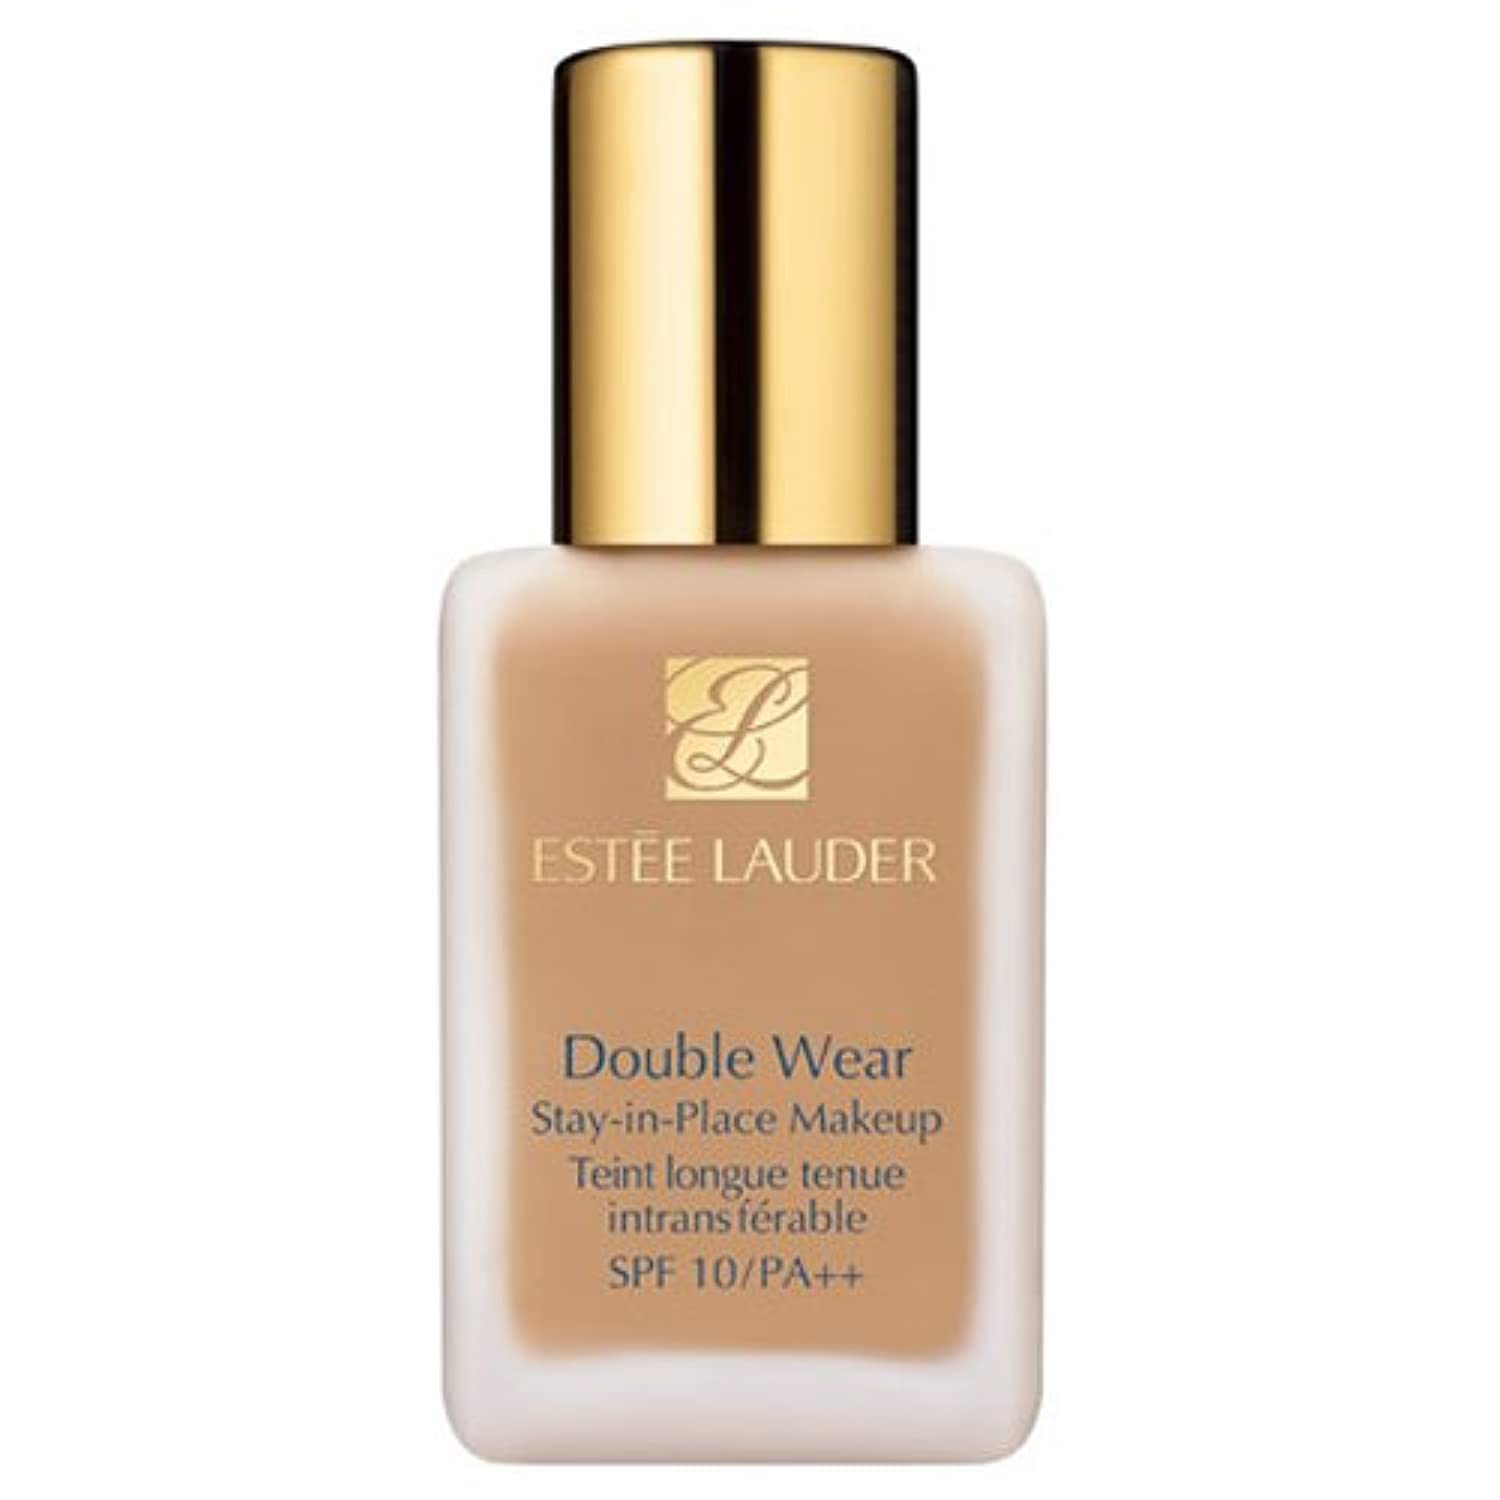 Estee Lauder, Double Wear - Stay-In-Place Makeup, Paraben-Free, Waterproof, Transfer-Resistant, Liquid Foundation, 1W2, Sand, SPF 10, 30 ml